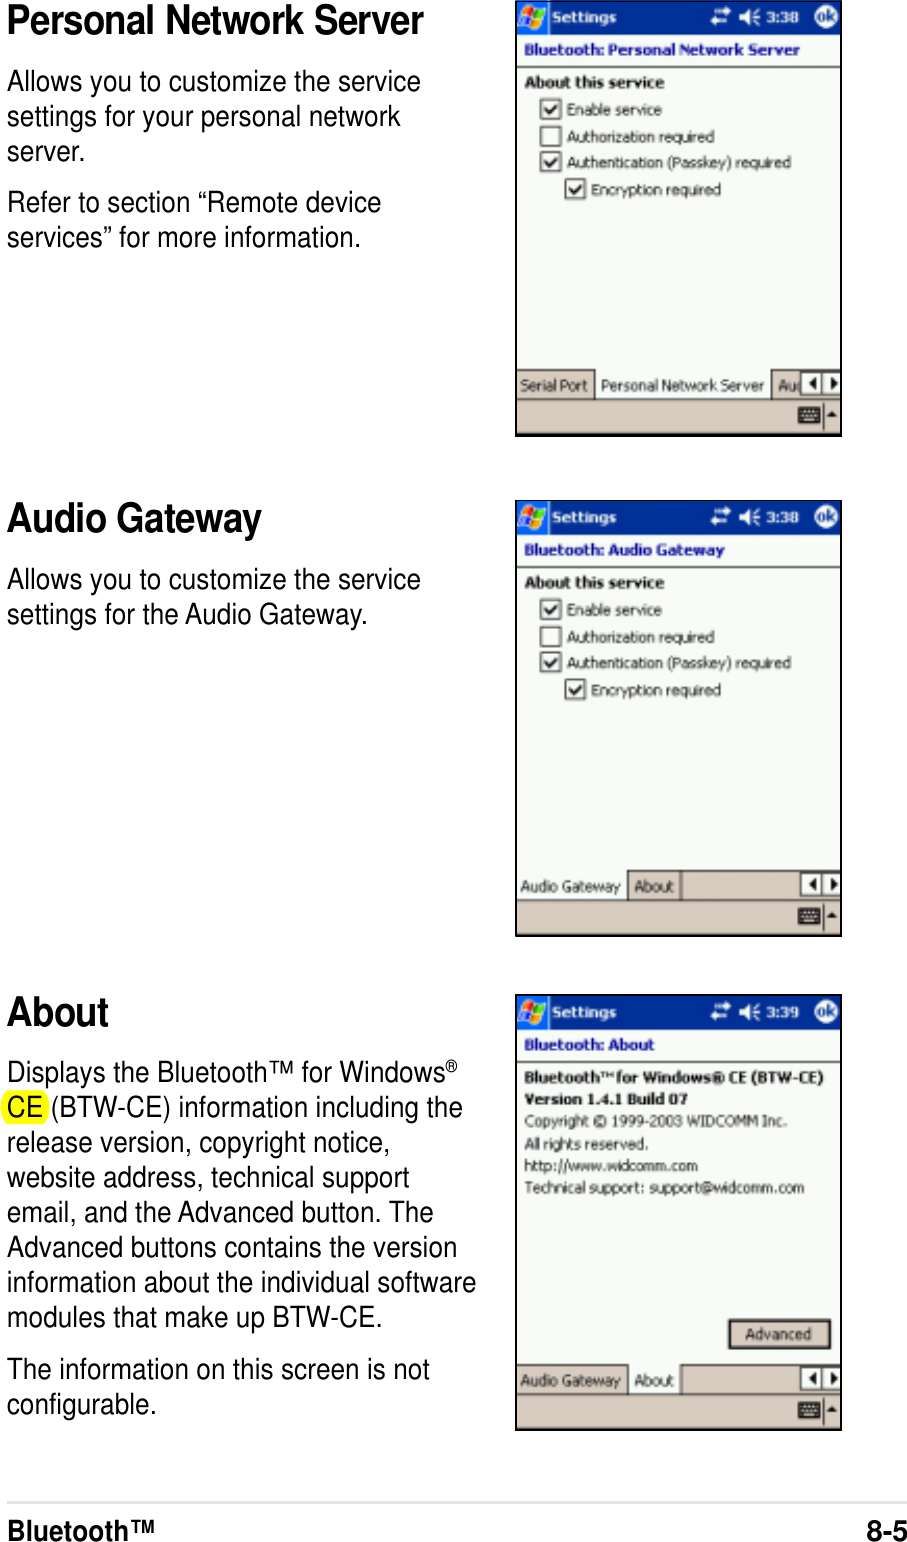 Bluetooth™8-5Personal Network ServerAllows you to customize the servicesettings for your personal networkserver.Refer to section “Remote deviceservices” for more information.Audio GatewayAllows you to customize the servicesettings for the Audio Gateway.AboutDisplays the Bluetooth™ for Windows®CE (BTW-CE) information including therelease version, copyright notice,website address, technical supportemail, and the Advanced button. TheAdvanced buttons contains the versioninformation about the individual softwaremodules that make up BTW-CE.The information on this screen is notconfigurable.